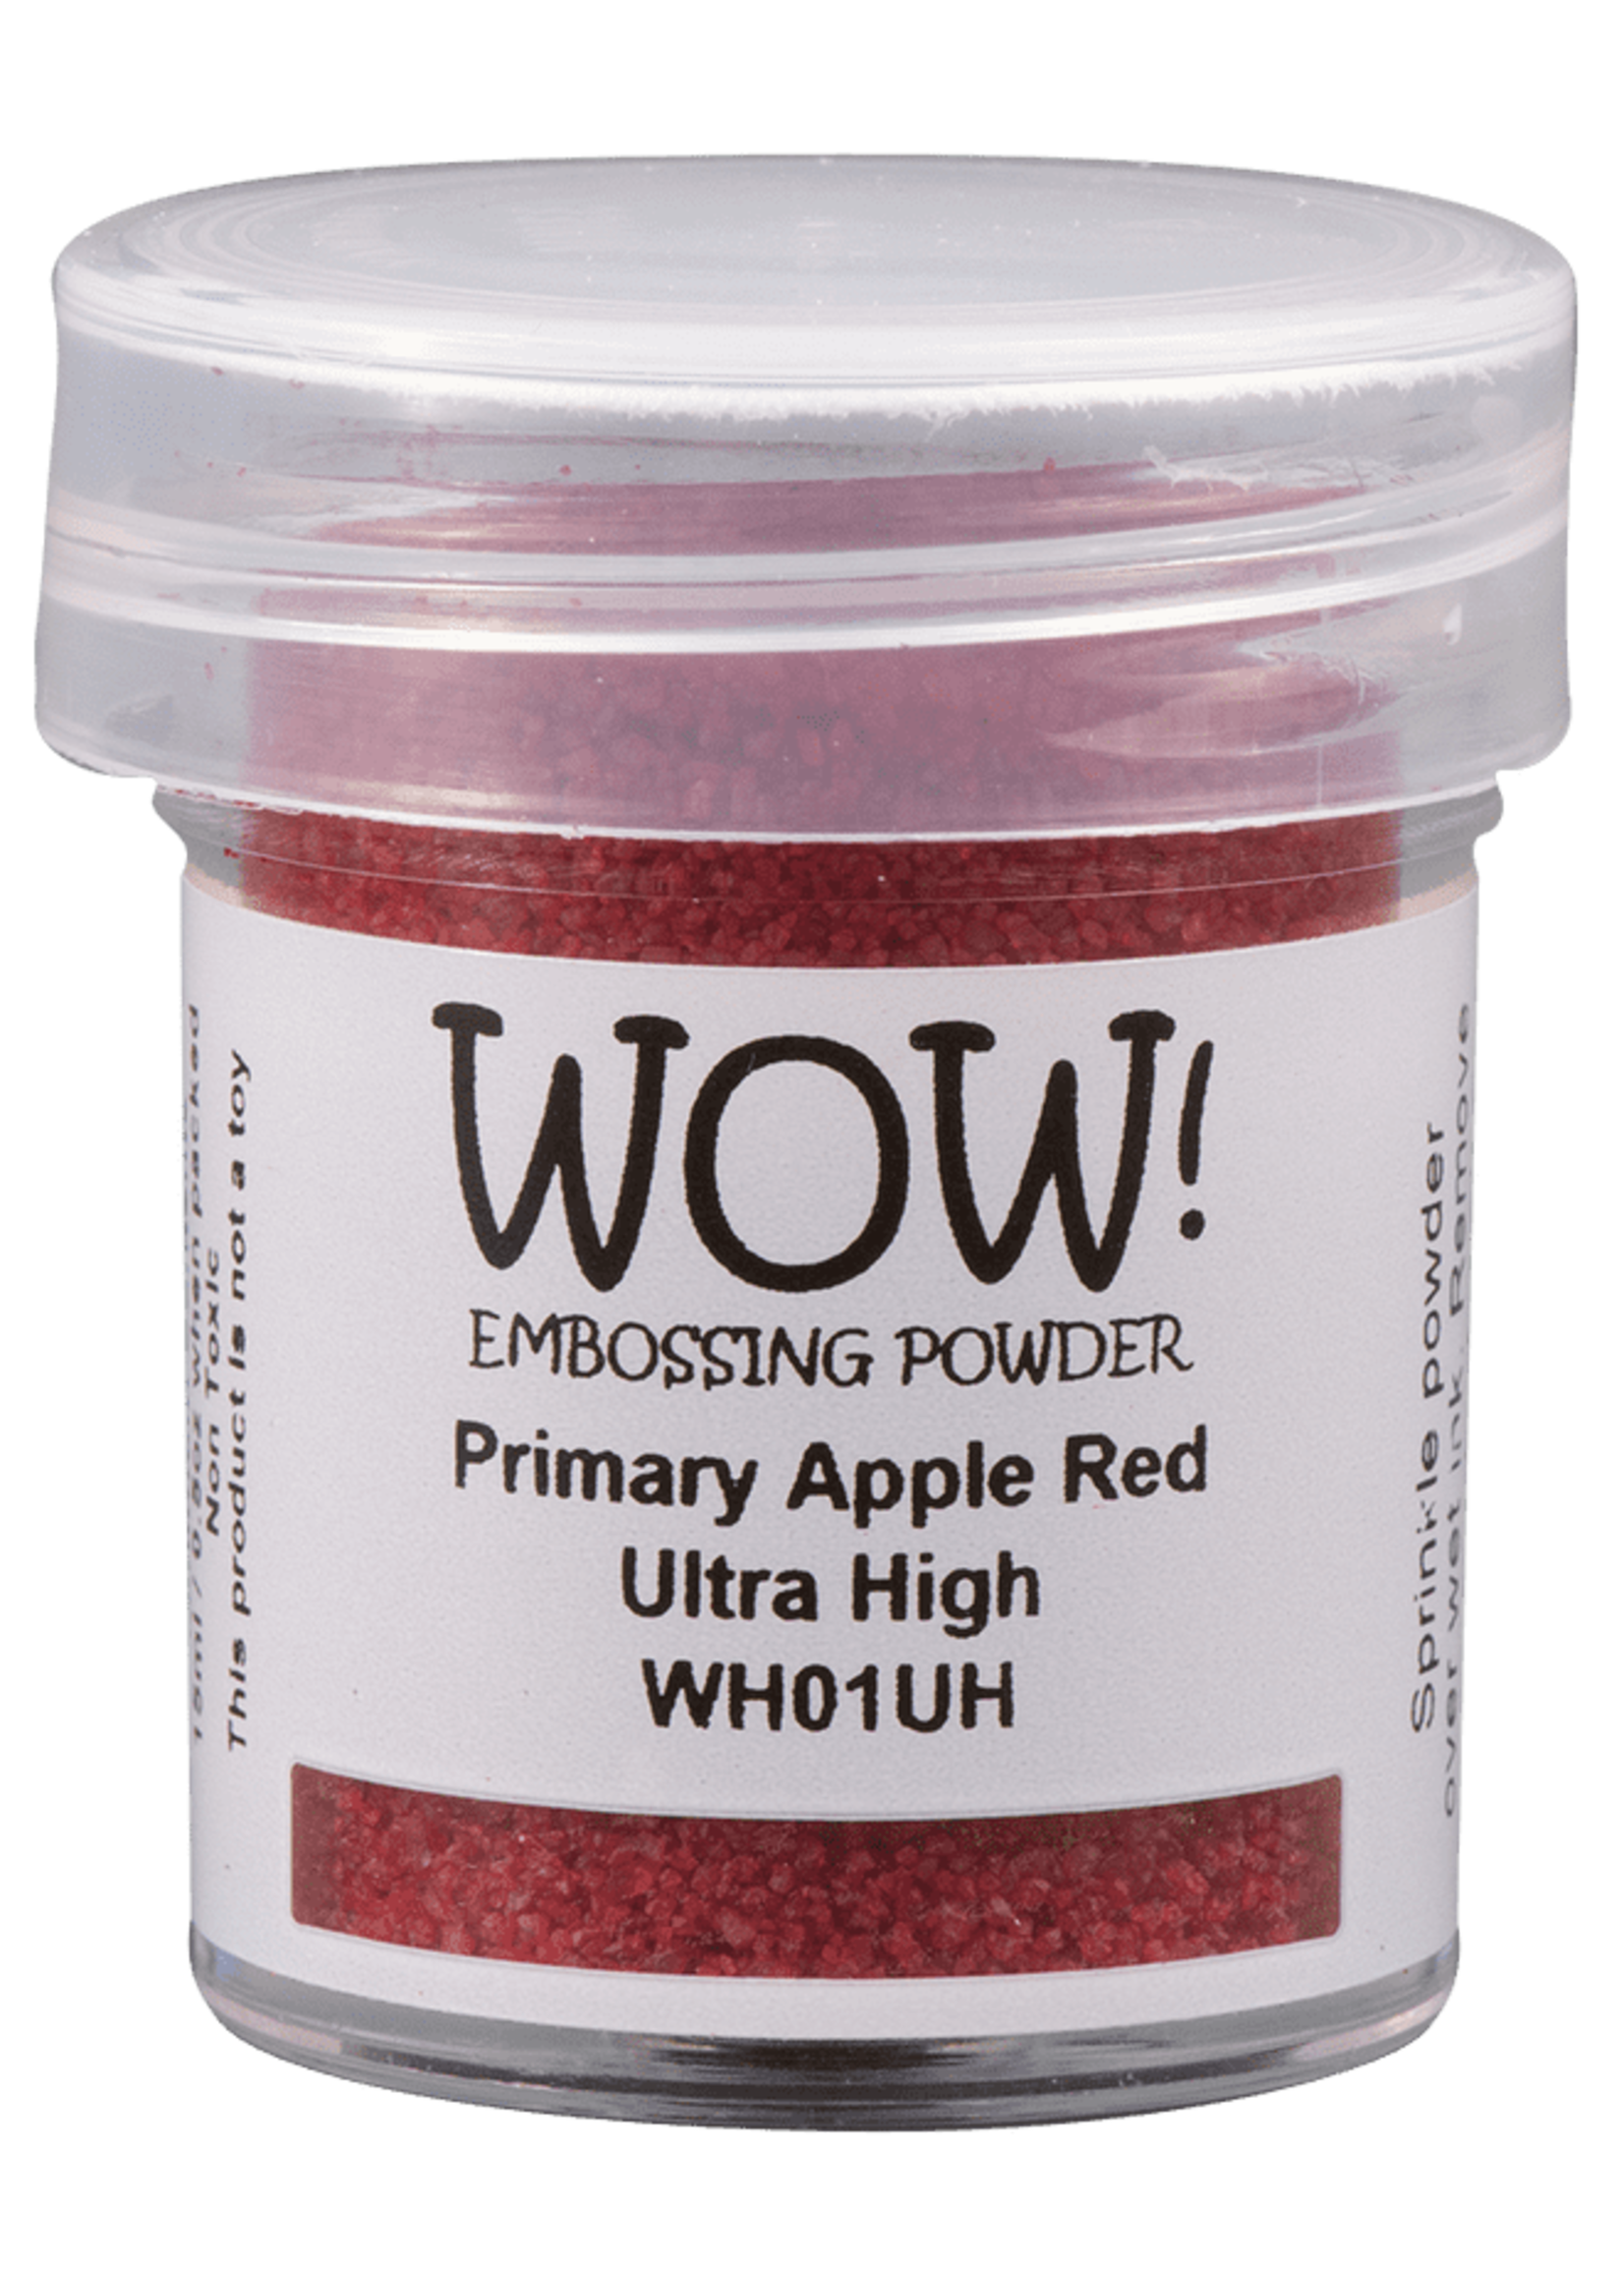 wow! Wow!Ultra High: Primary Apple Red